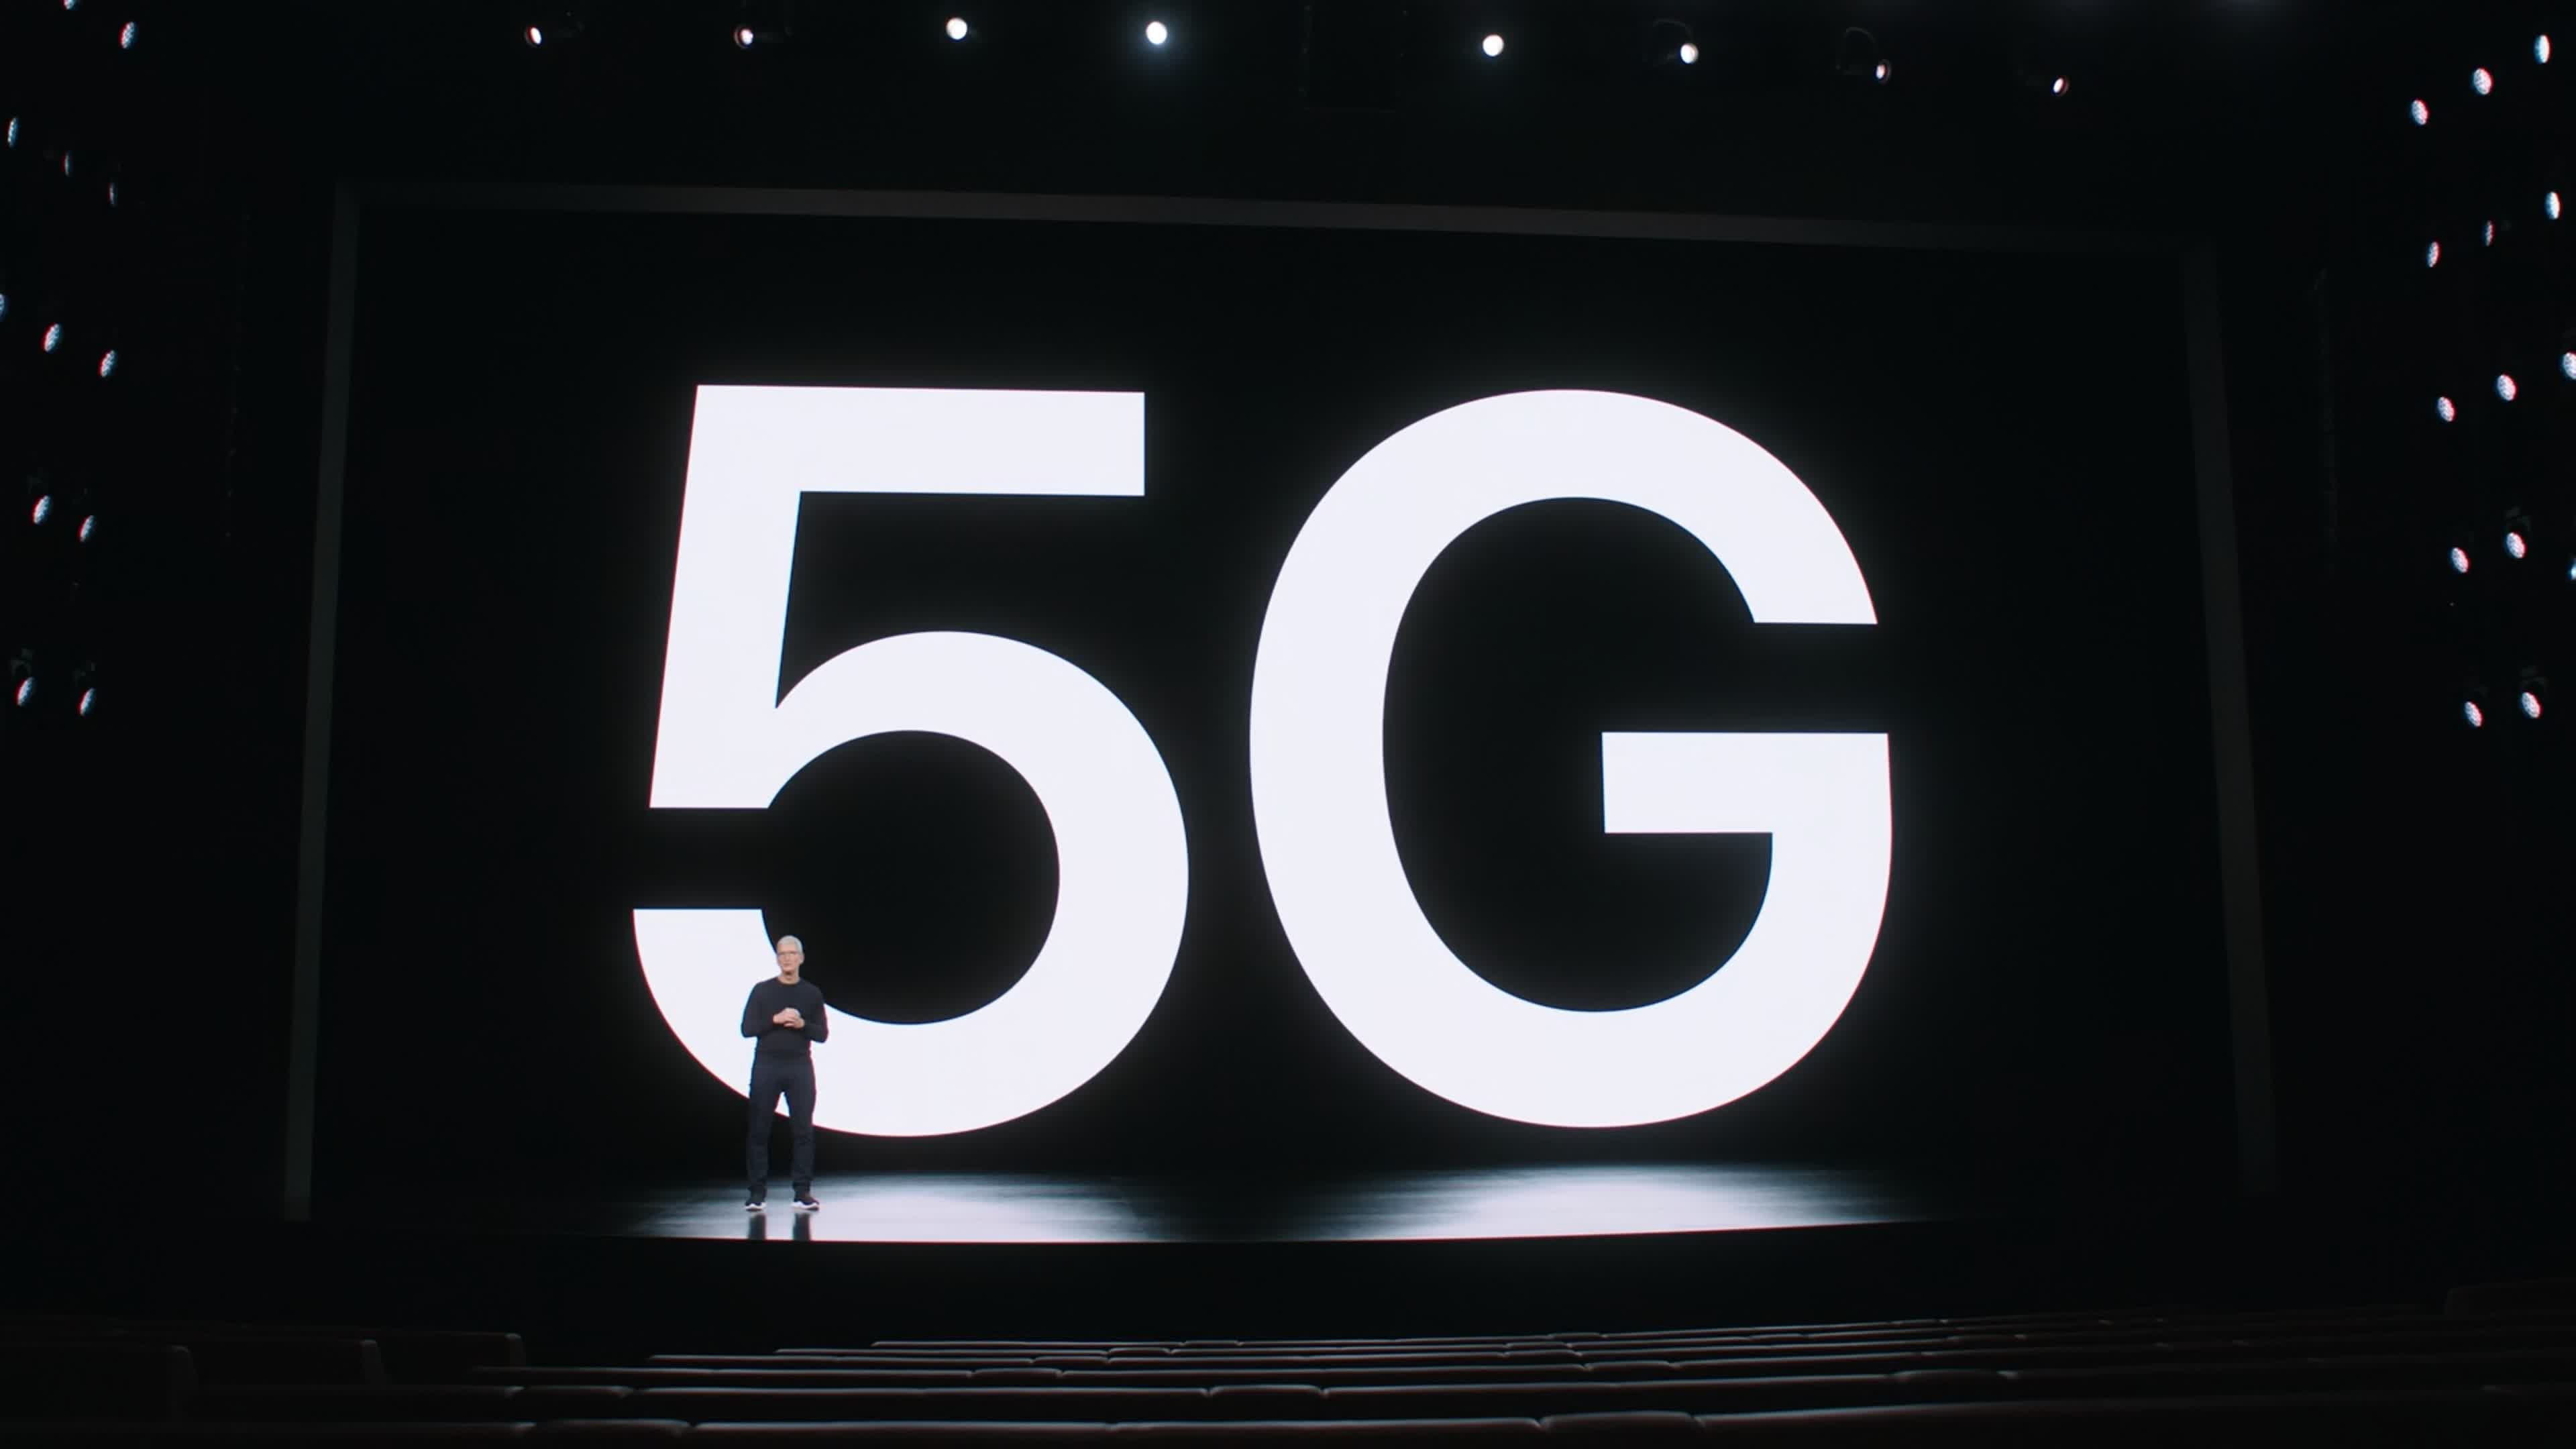 Global 5G phone sales surpassed those of 4G handsets for the first time in January 2022